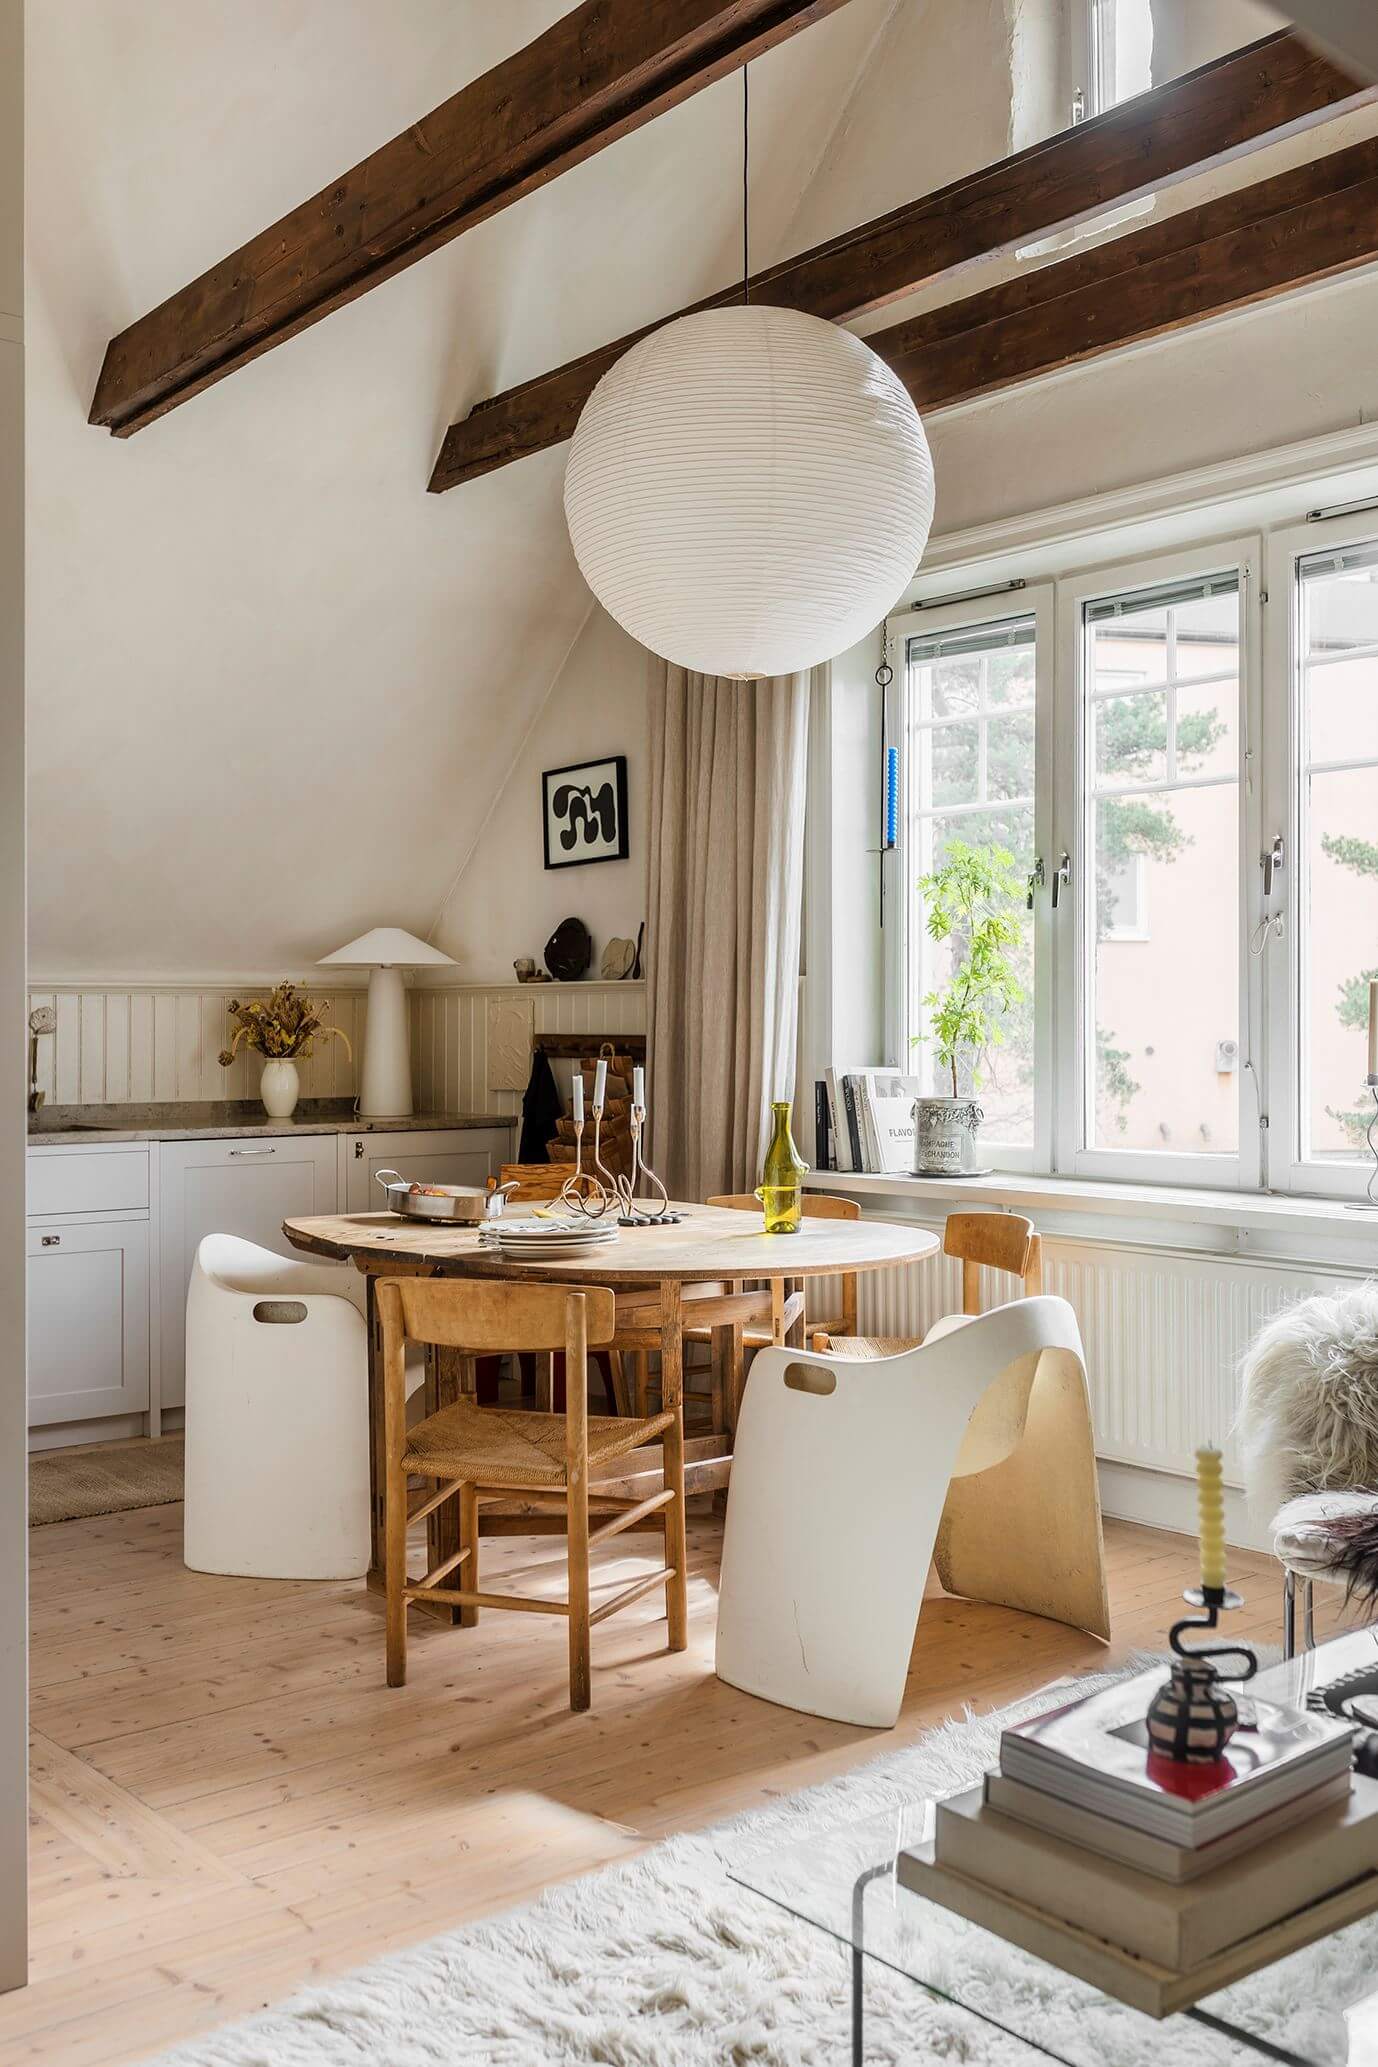 A Charming Attic Apartment with High Ceilings